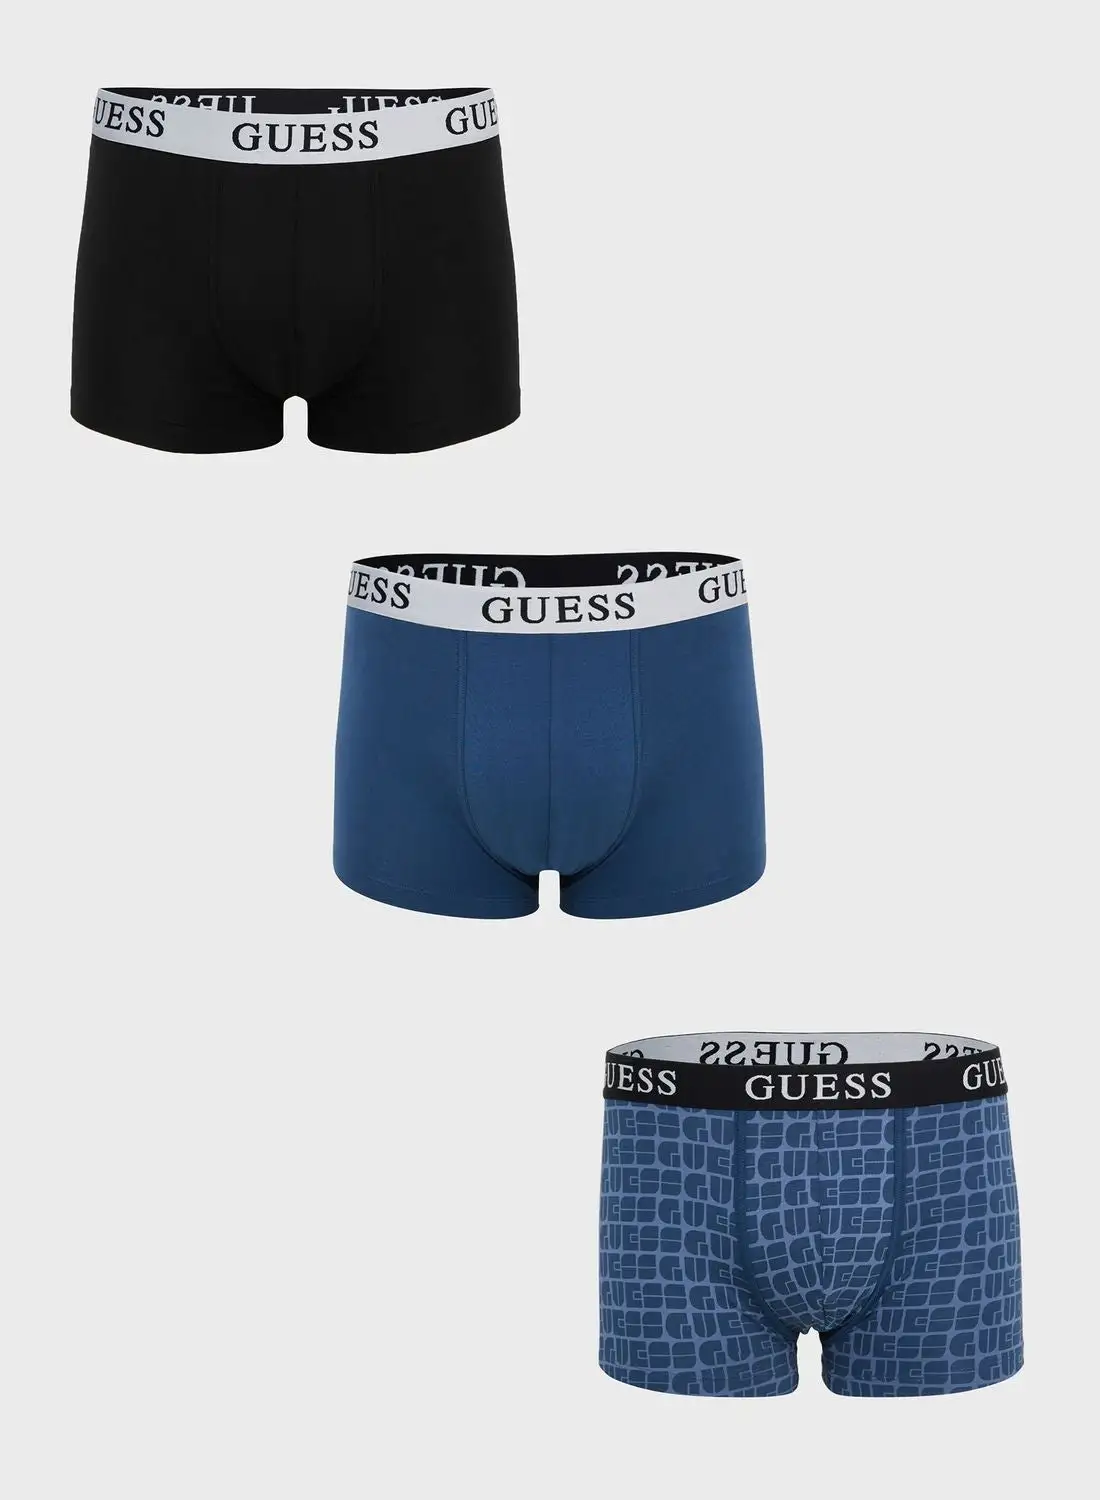 GUESS 3 Pack Logo Band Trunks